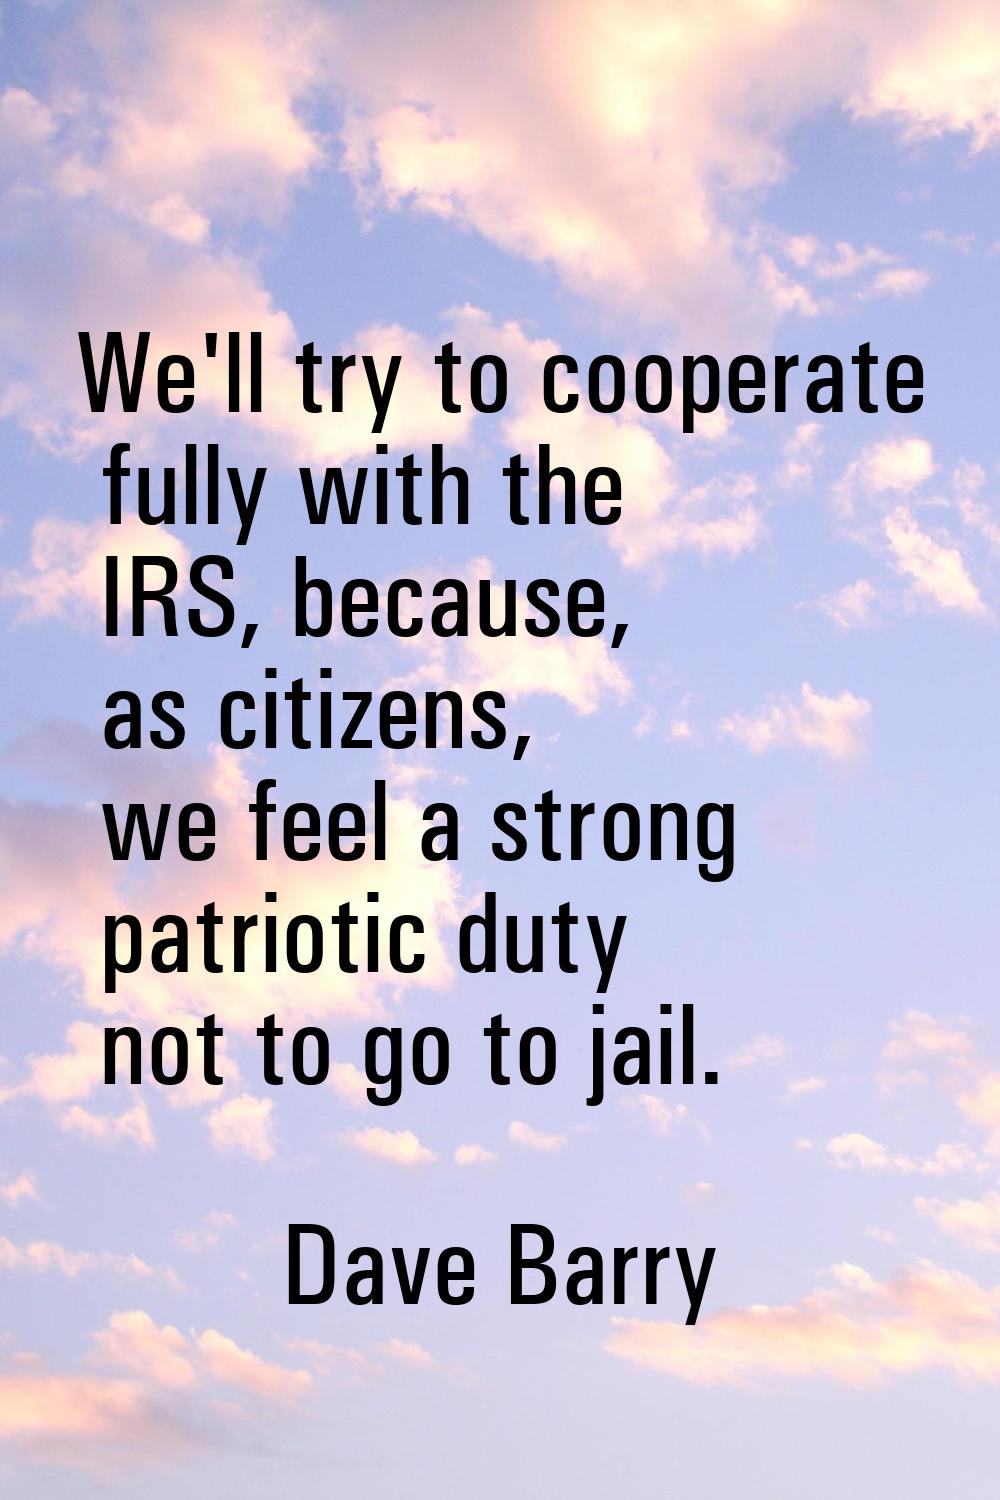 We'll try to cooperate fully with the IRS, because, as citizens, we feel a strong patriotic duty no